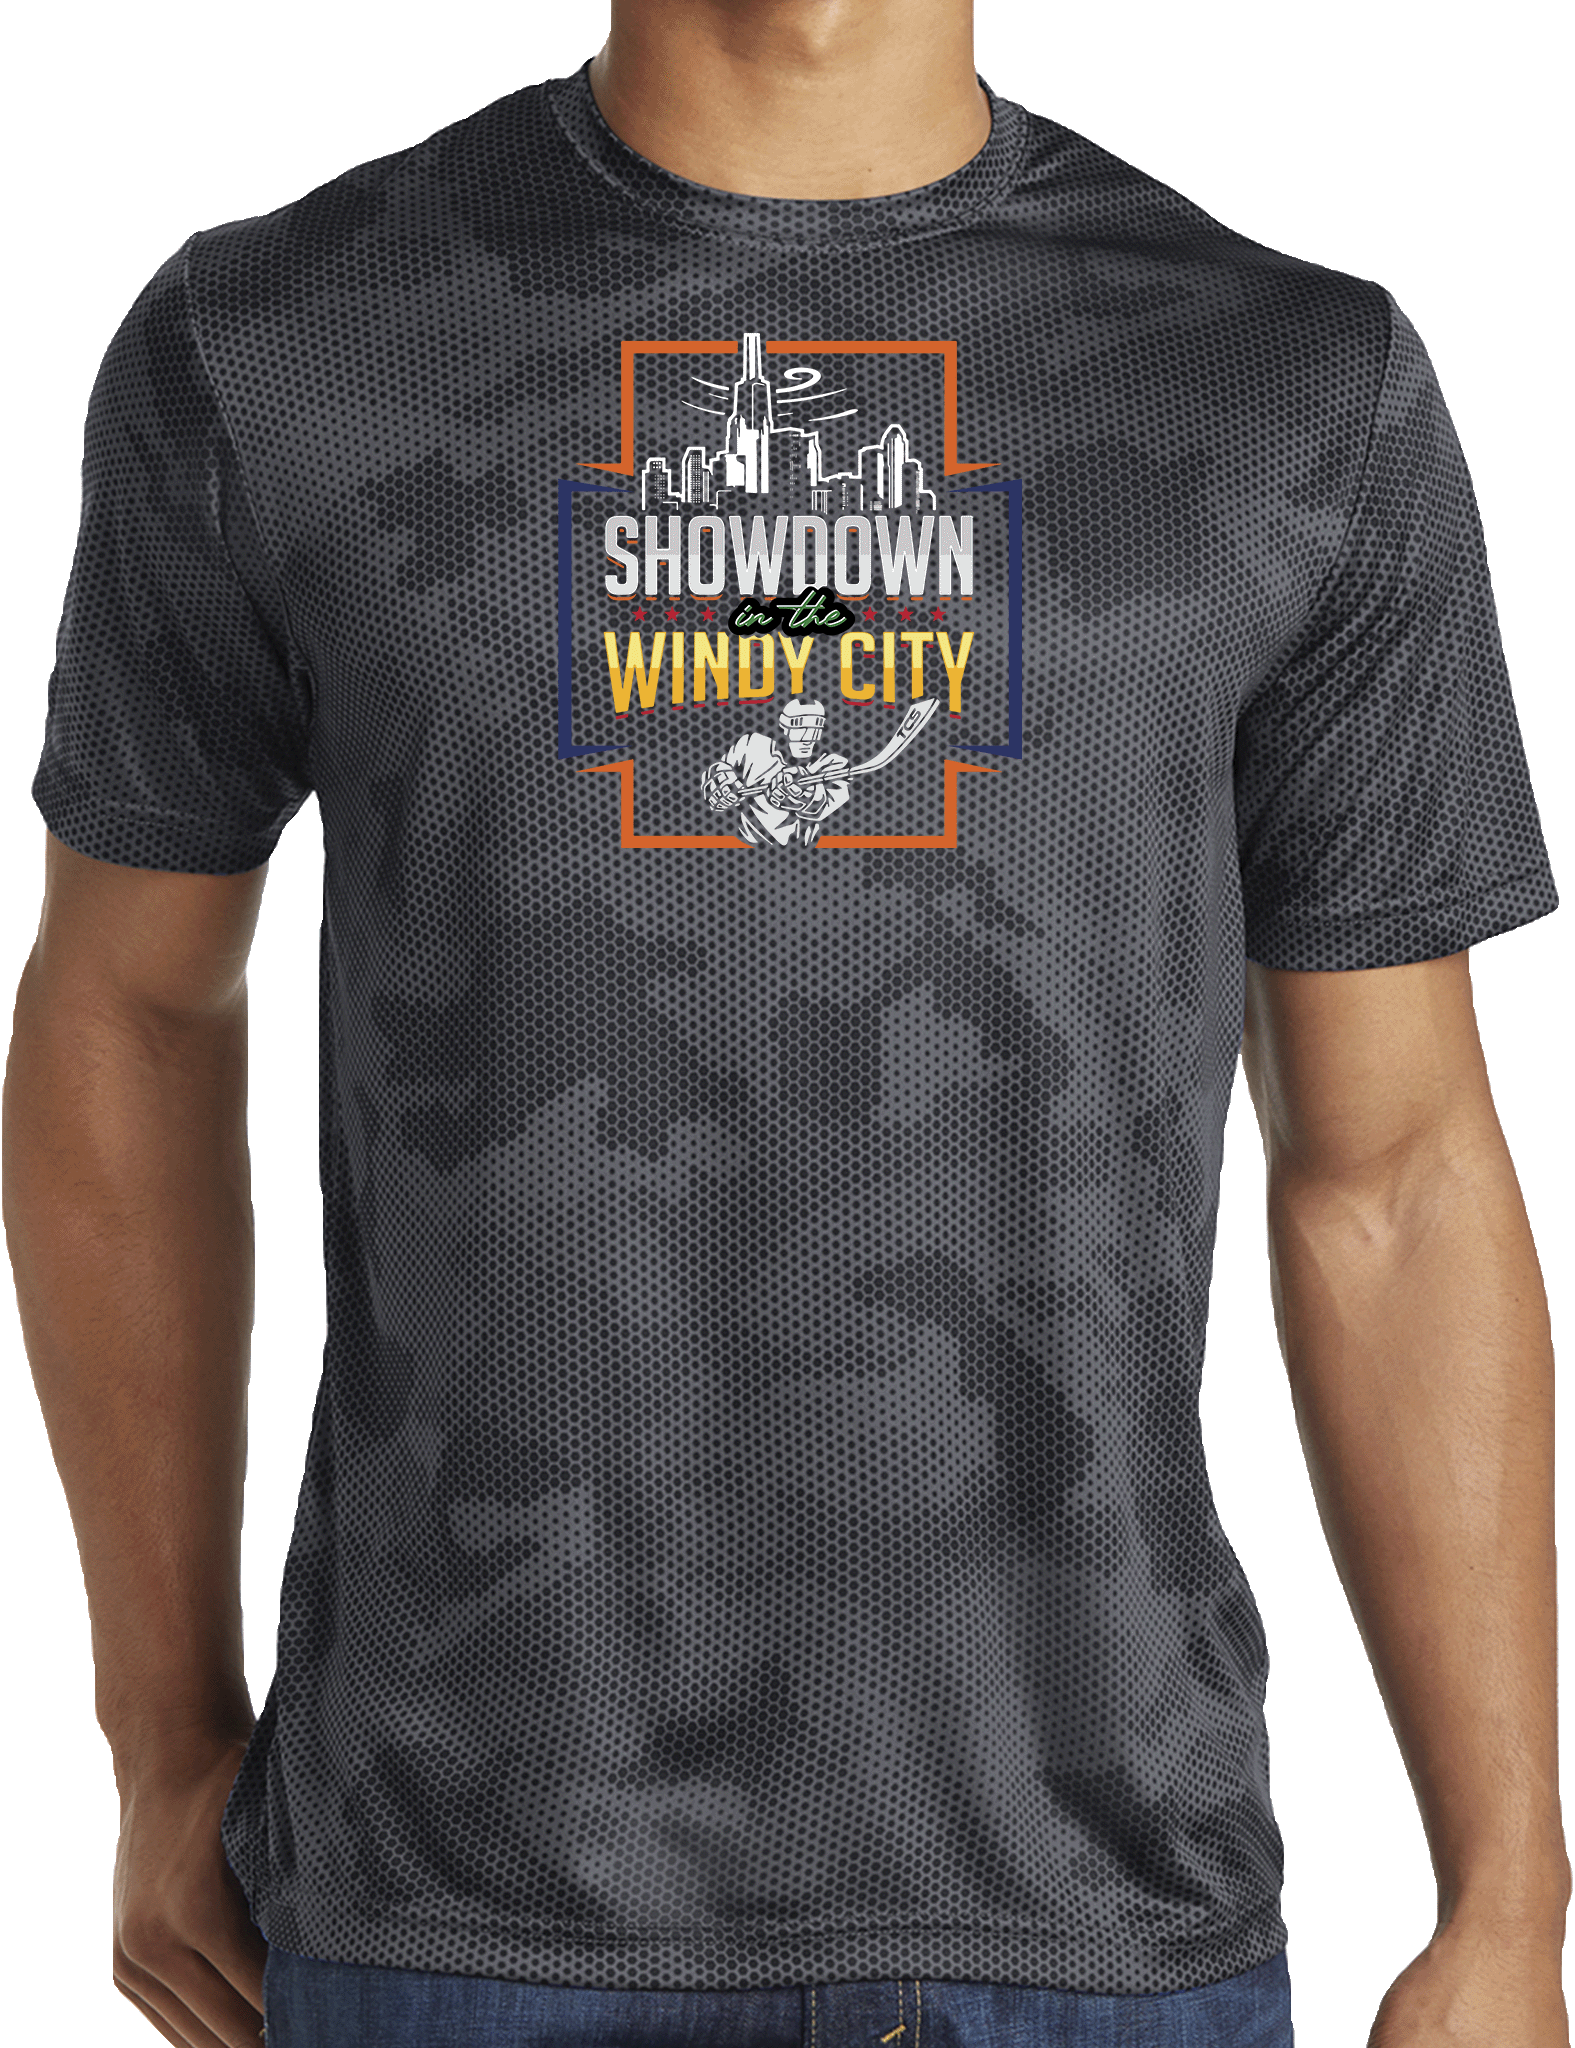 PERFORMANCE SHIRTS - 2023 Showdown in the Windy City